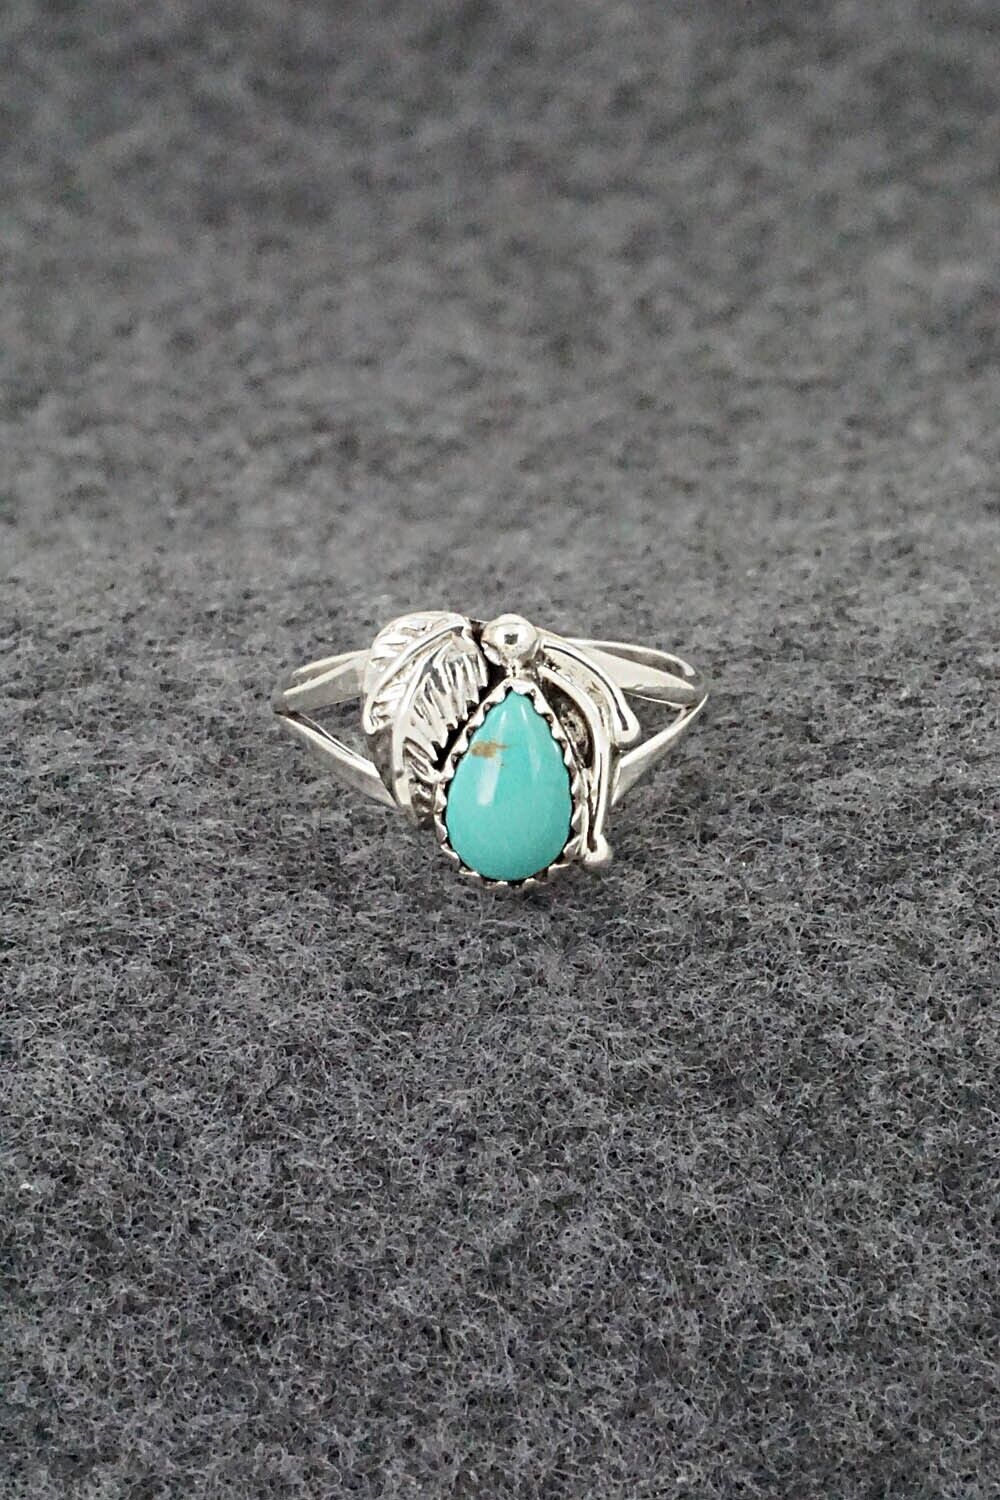 Turquoise & Sterling Silver Ring - Letricia Largo - Size 5.5